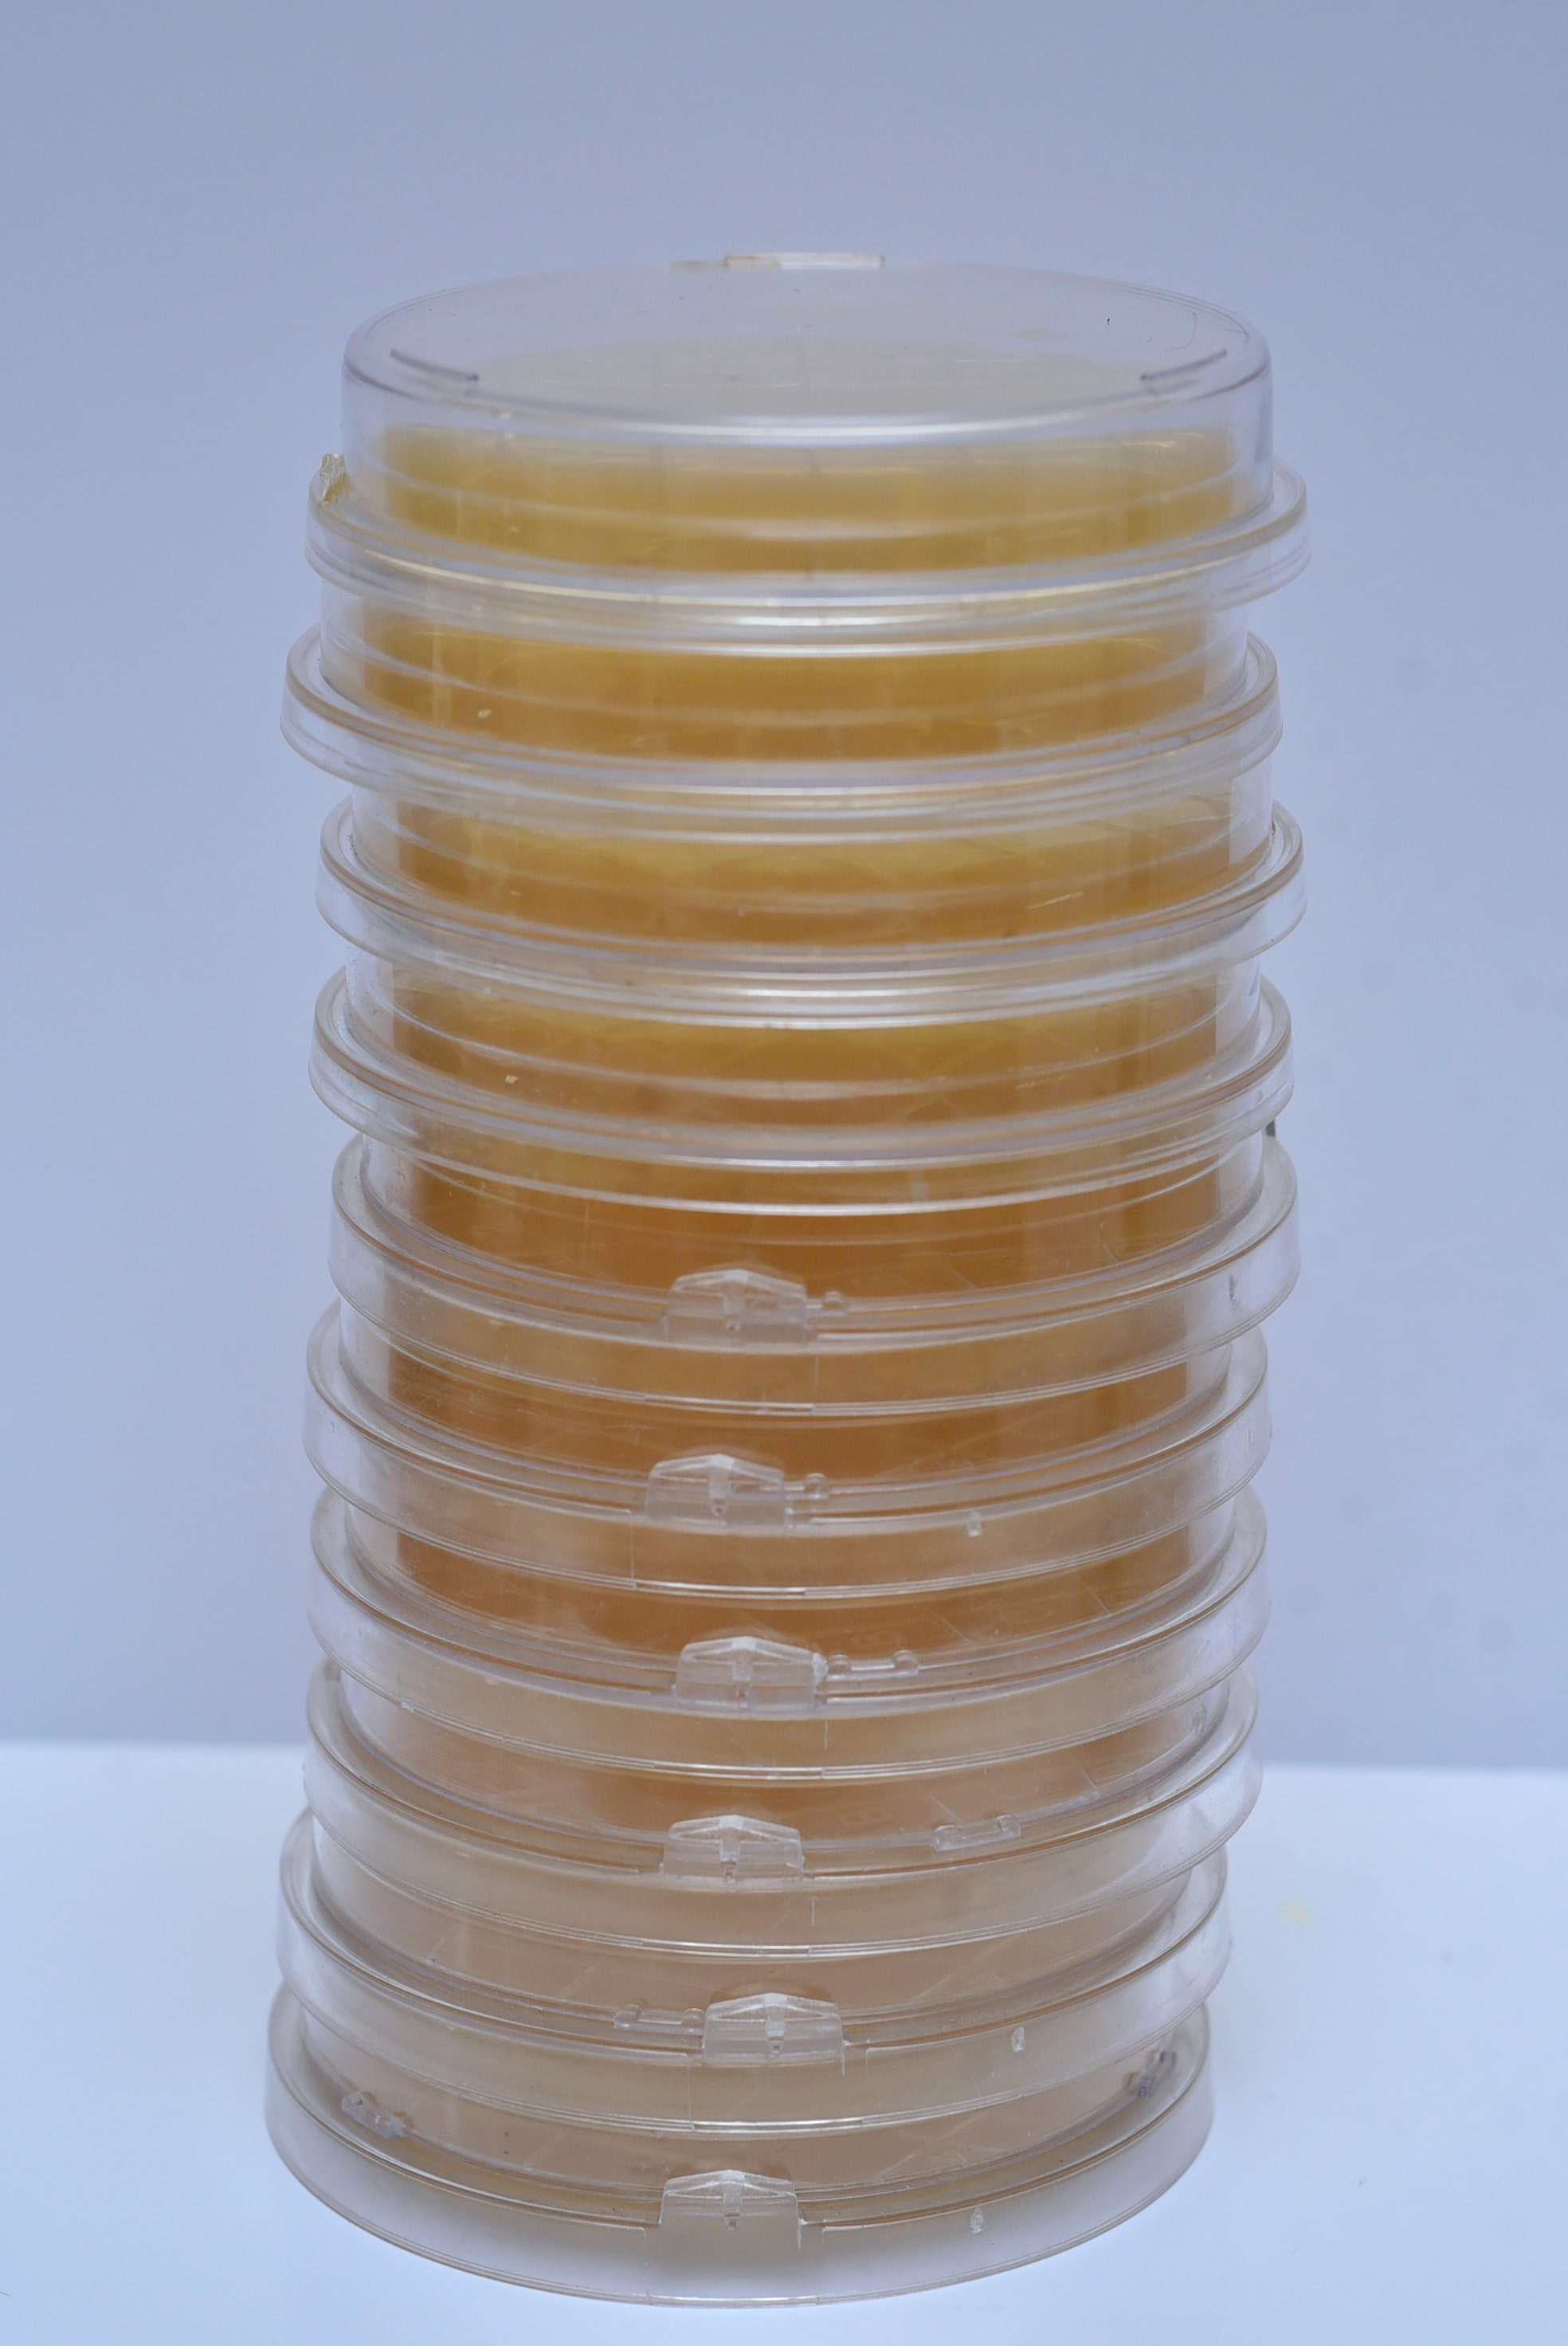 Soyabean Casein Digest Agar Contact plates 55mm,(Triple Packed, Gamma Irradiated)